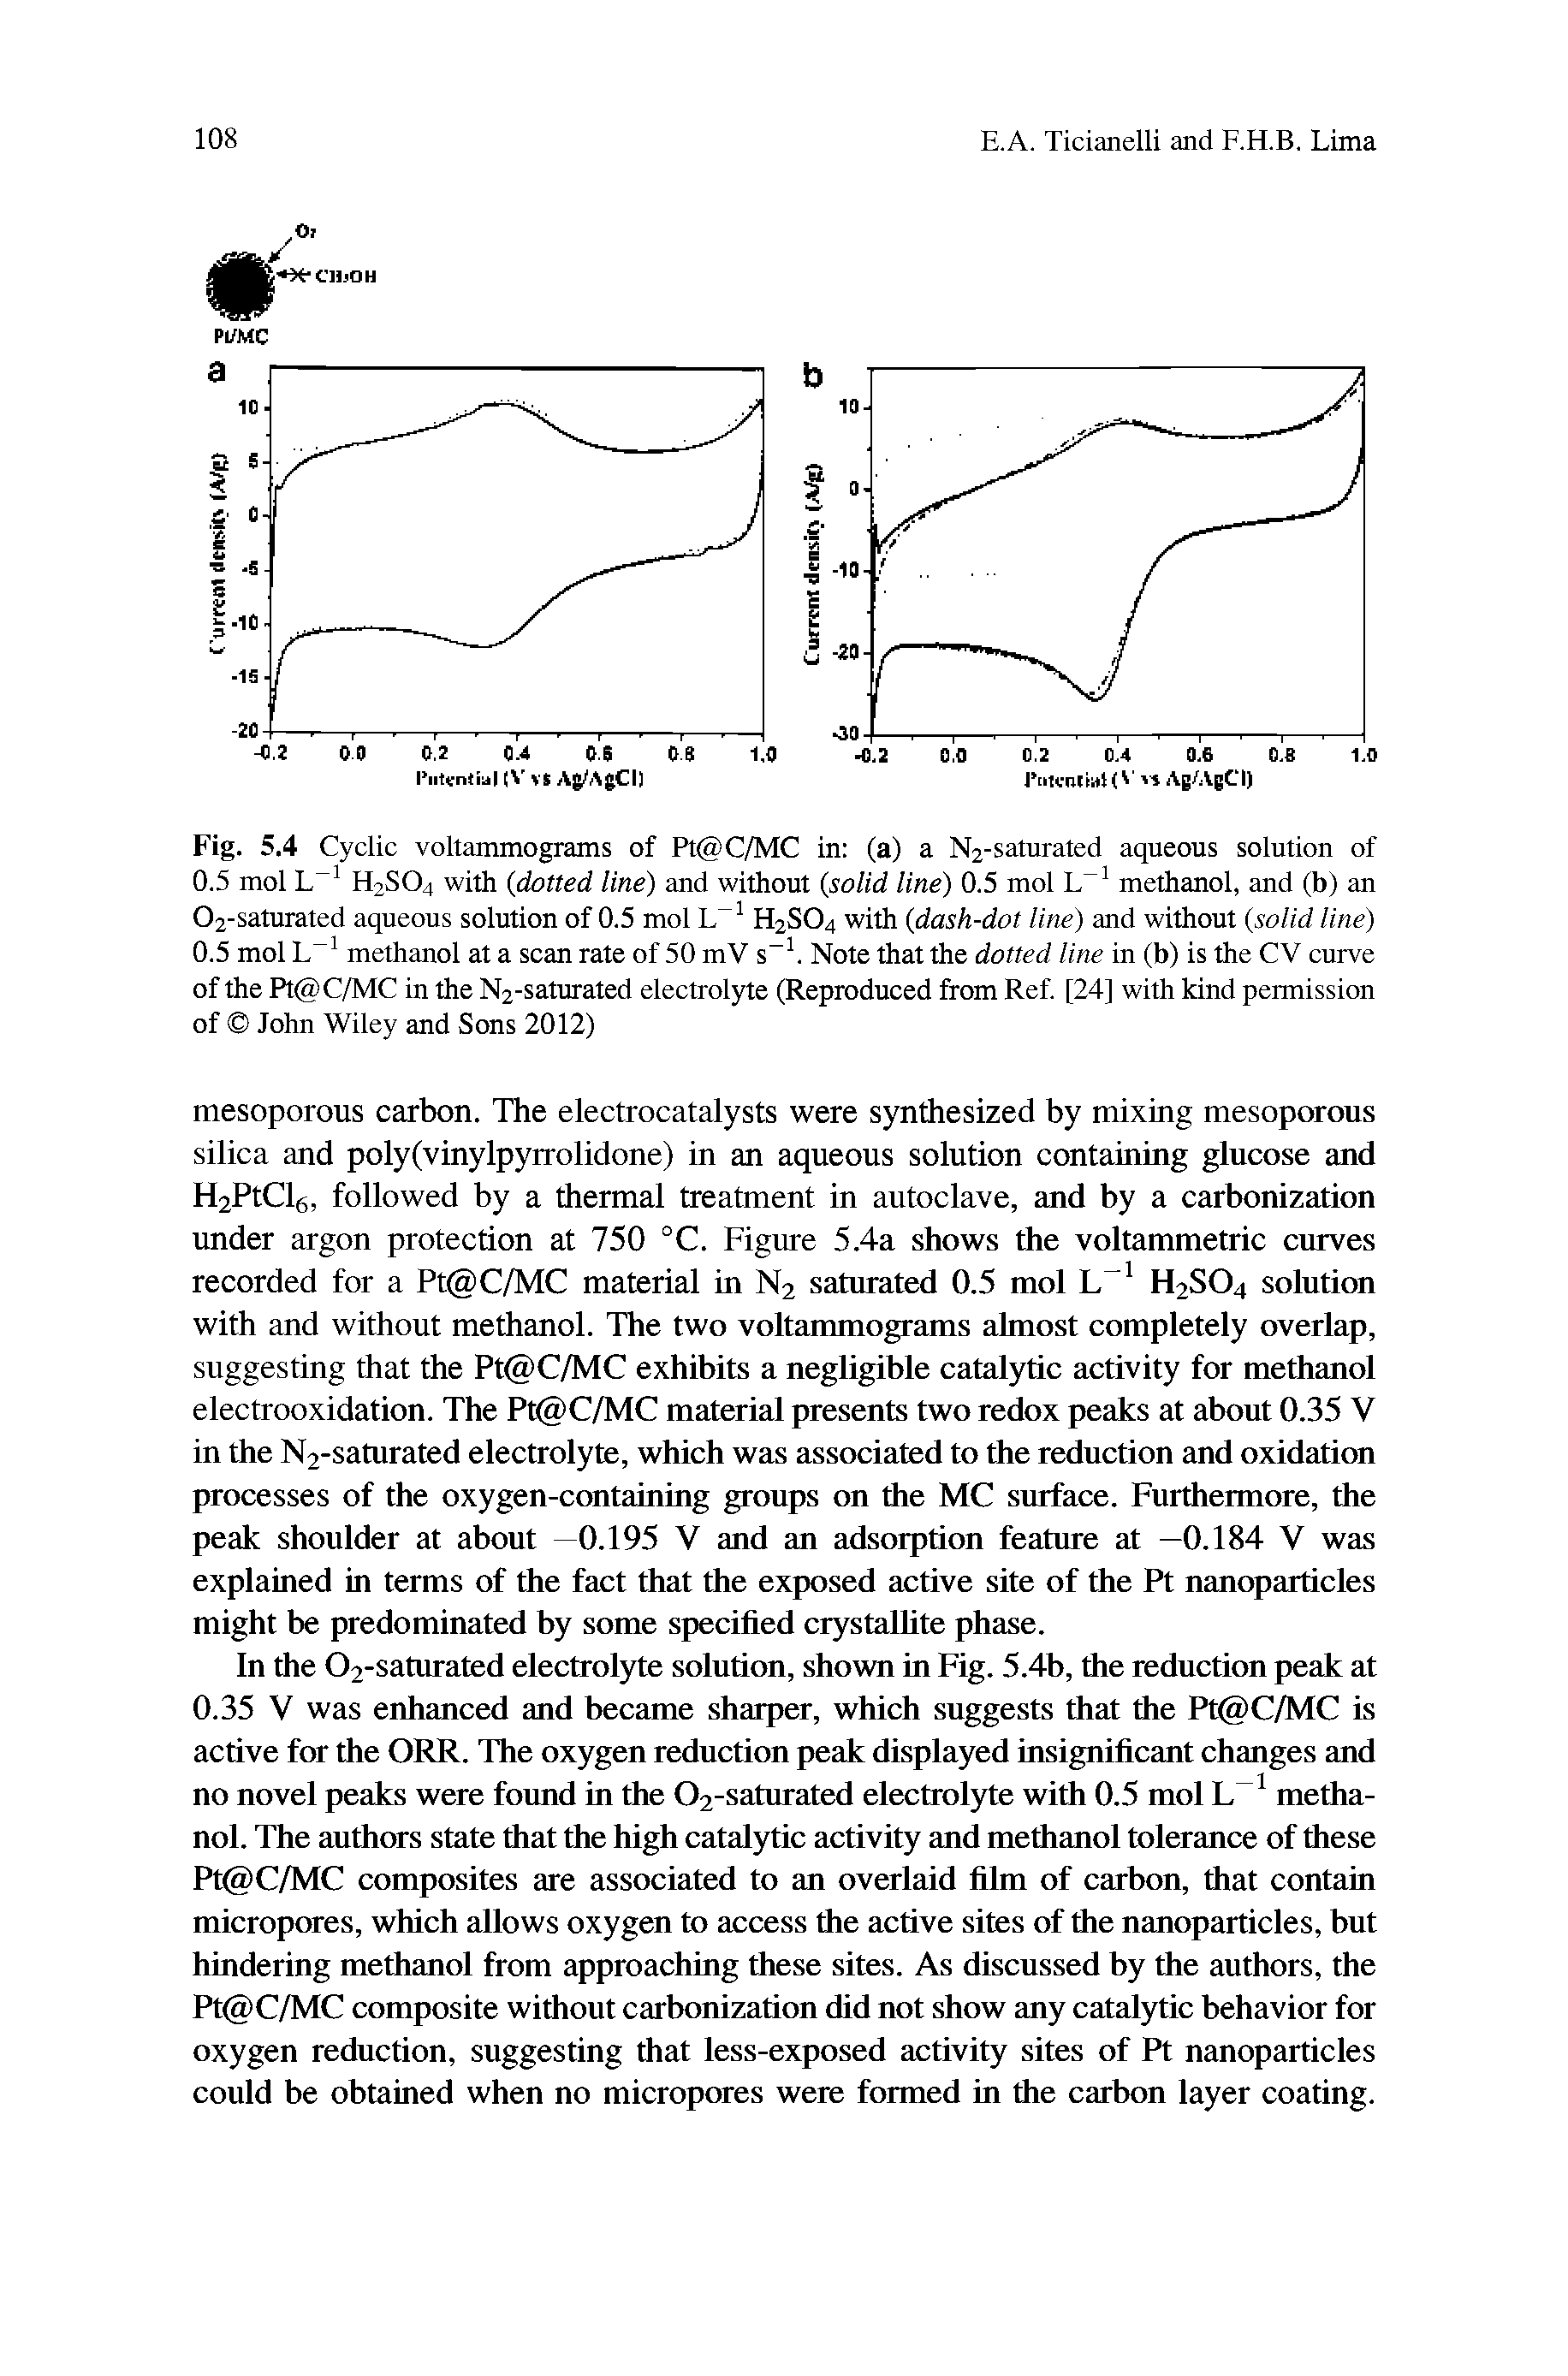 Fig. 5.4 Cyclic voltammograms of Pt C/MC in (a) a N2-saturated aqueous solution of 0.5 mol L H2SO4 with dotted line) and without (solid line) 0.5 mol L methanol, and (b) an 02-saturated aqueous solution of 0.5 mol L H2SO4 with (dash-dot line) and without (solid line) 0.5 mol L methanol at a scan rate of 50 mV s . Note that the dotted line in (b) is the CV curve of the Pt C/MC in the N2-saturated electrolyte (Reproduced from Ref. [24] with kind permission of John Wiley and Sons 2012)...